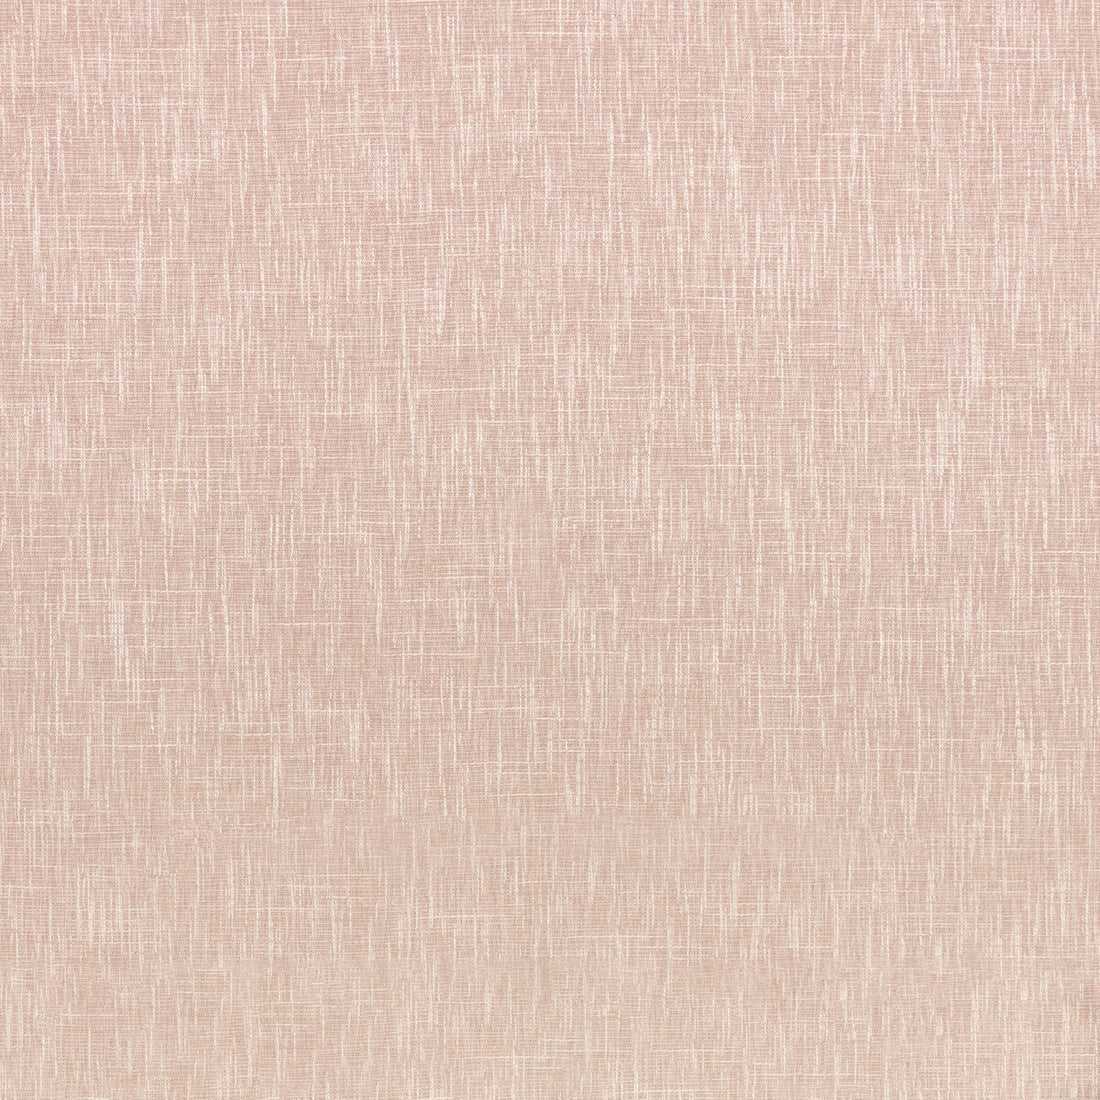 Maris fabric in blush color - pattern 35923.17.0 - by Kravet Basics in the Monterey collection